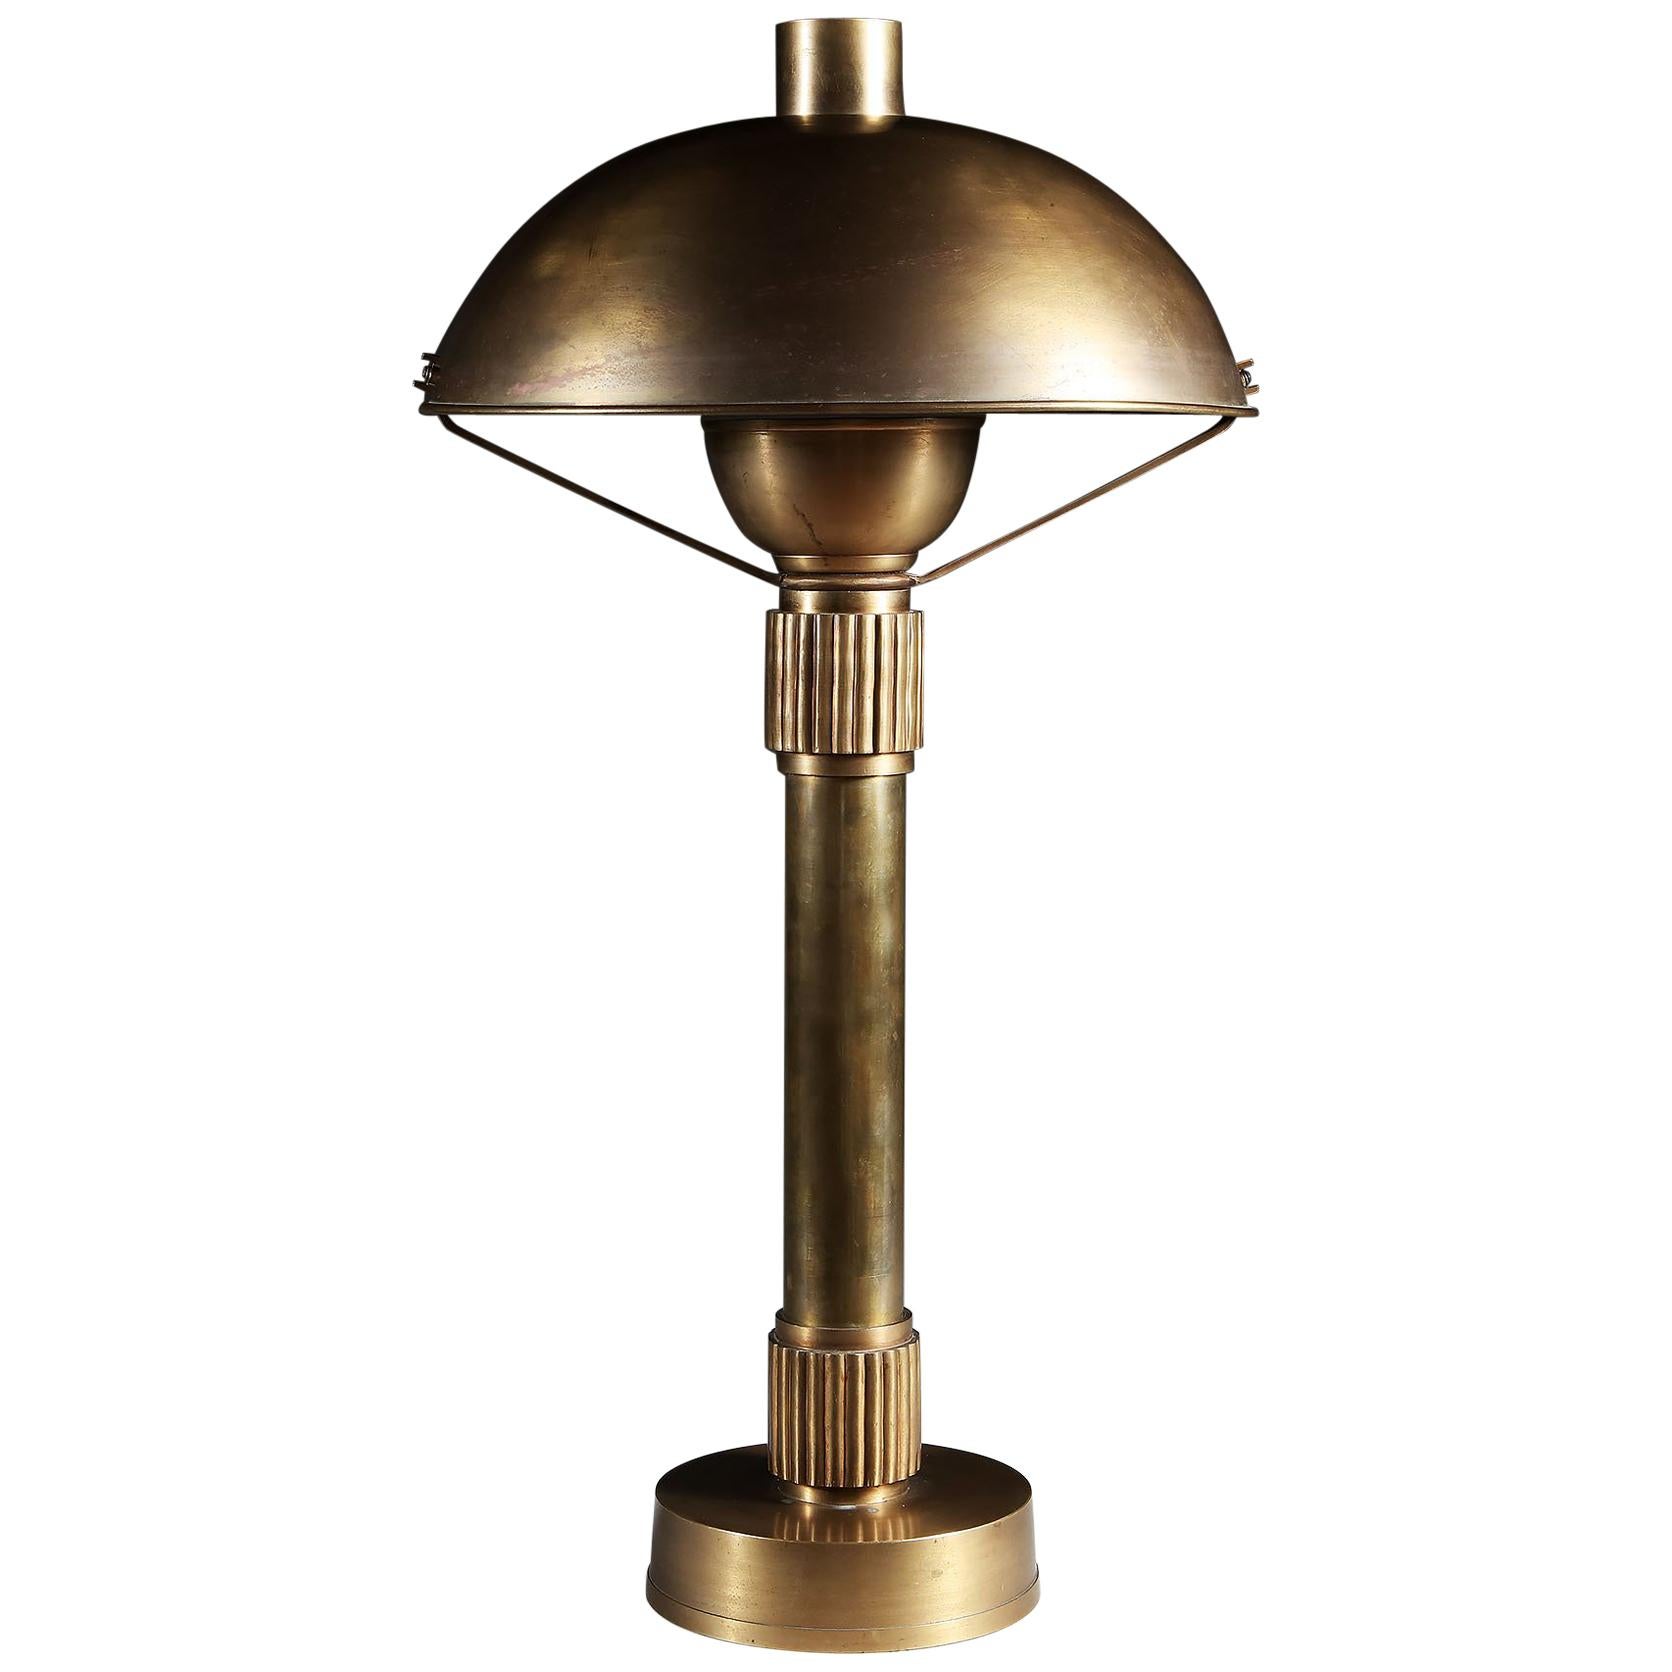 20th Century Art Deco Metal Brass Lamp with Brass Shade Attributed to Perzel